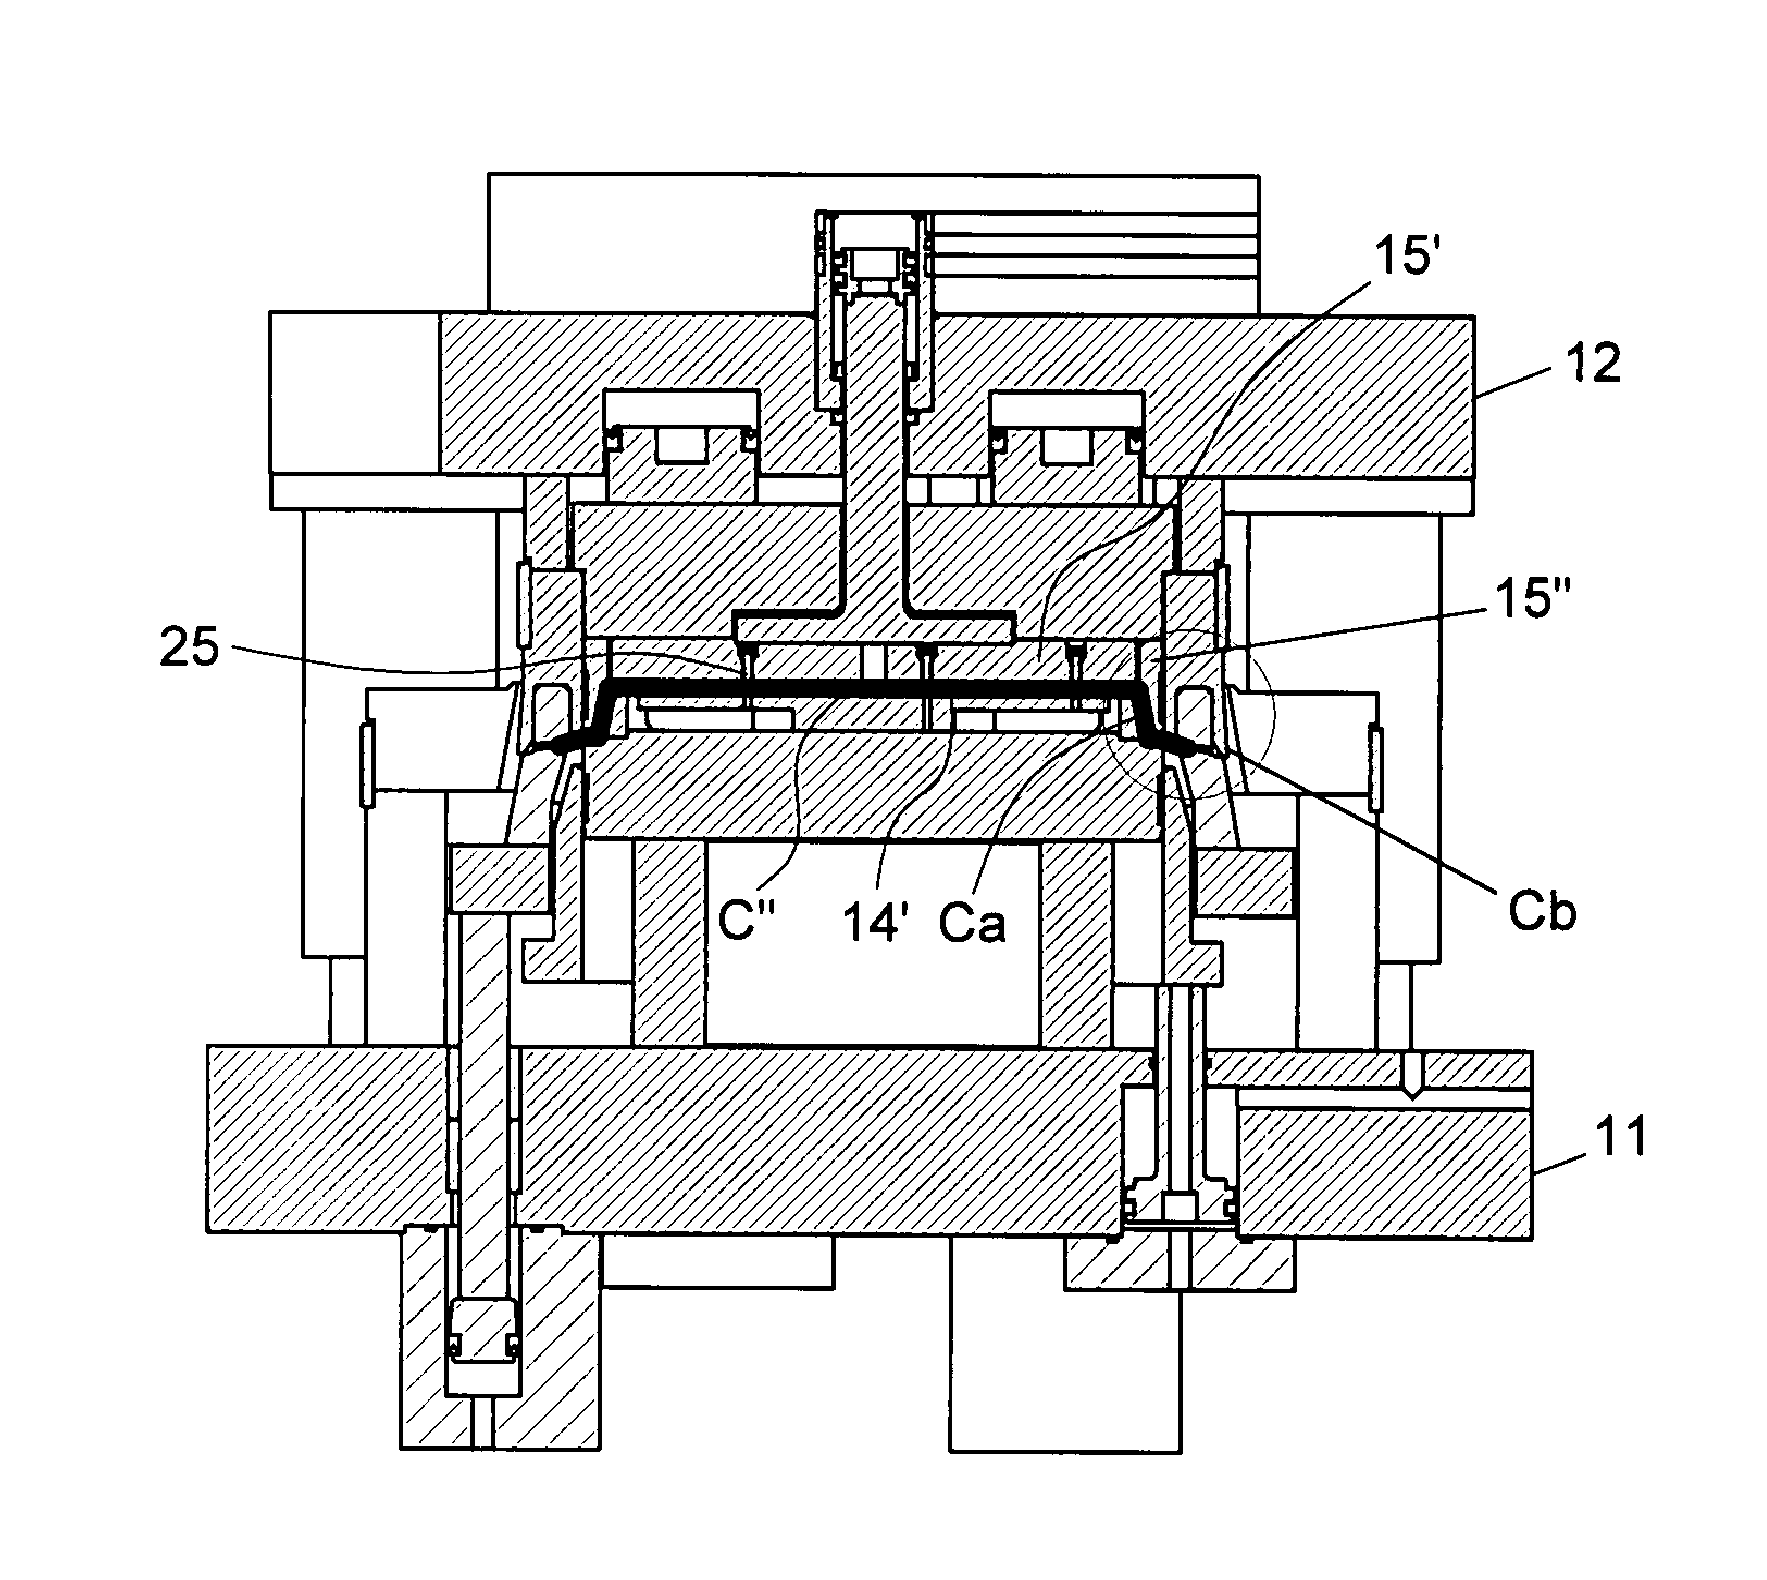 Equipment and method for the forming of paper containetrs